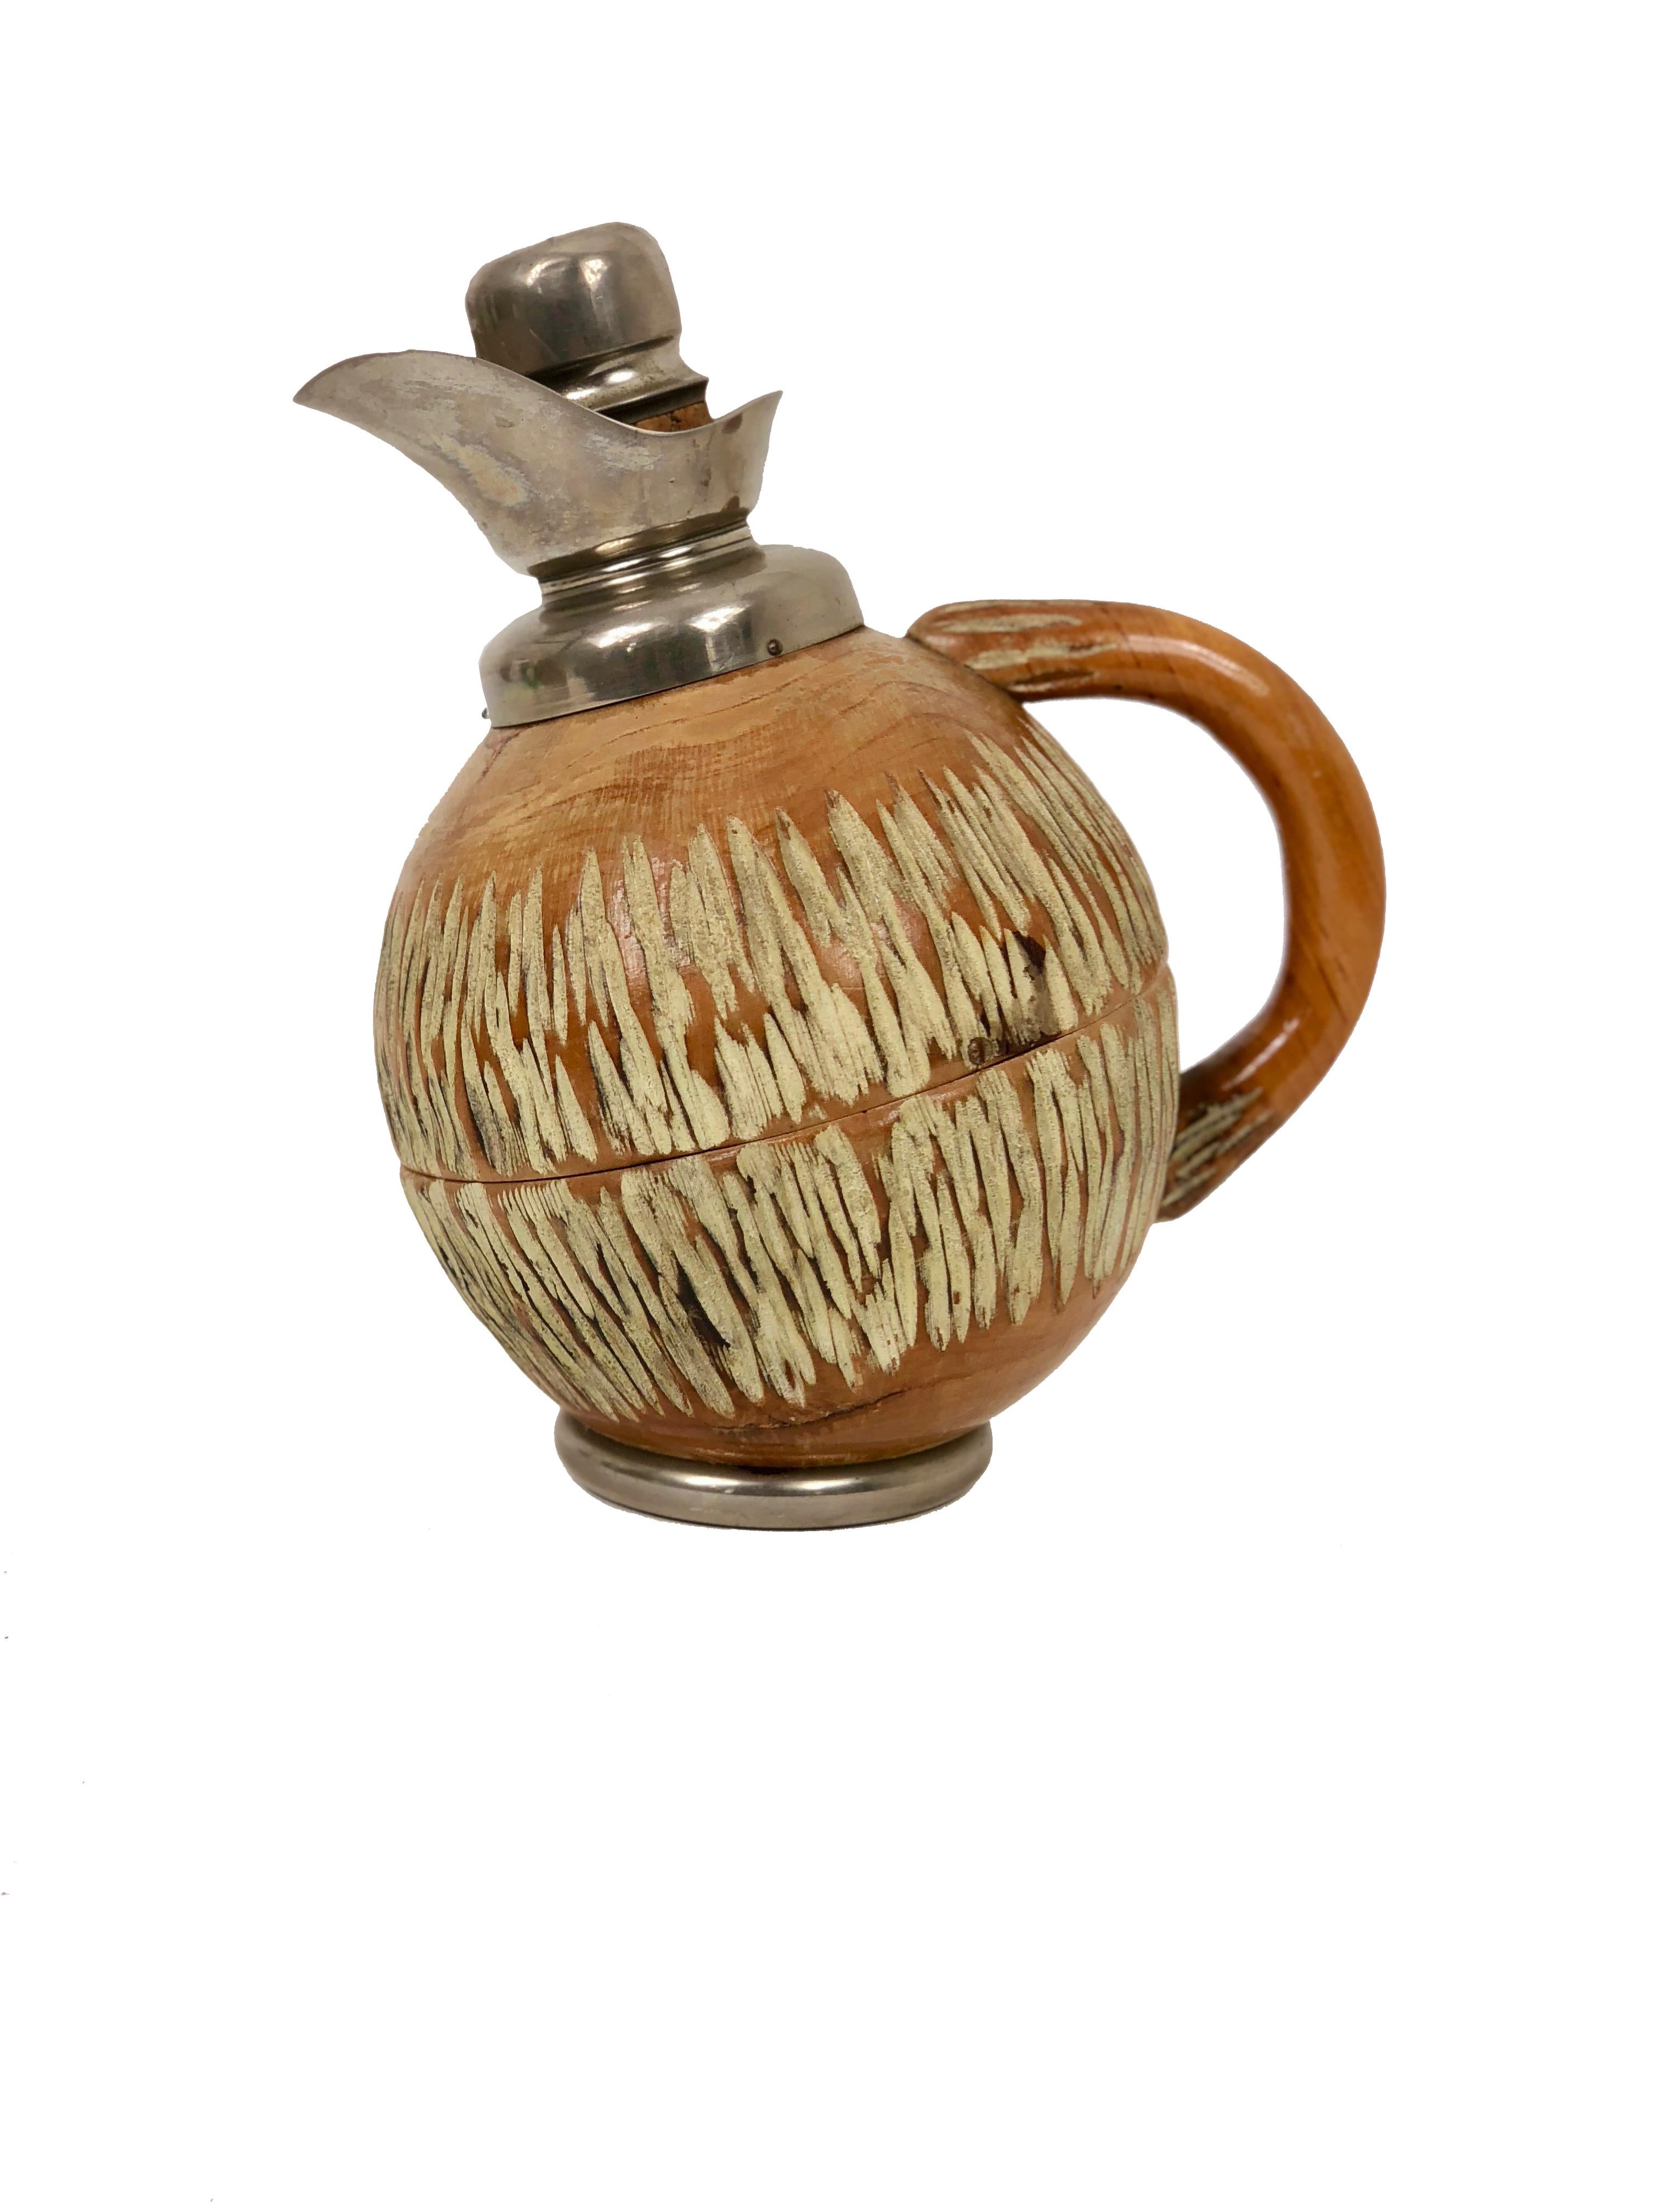 Thermos/decanter by the Italian Aldo Tura made of hand-carved wood and metal in a walnuts shape. 

The stamp is engraved on the bottom.